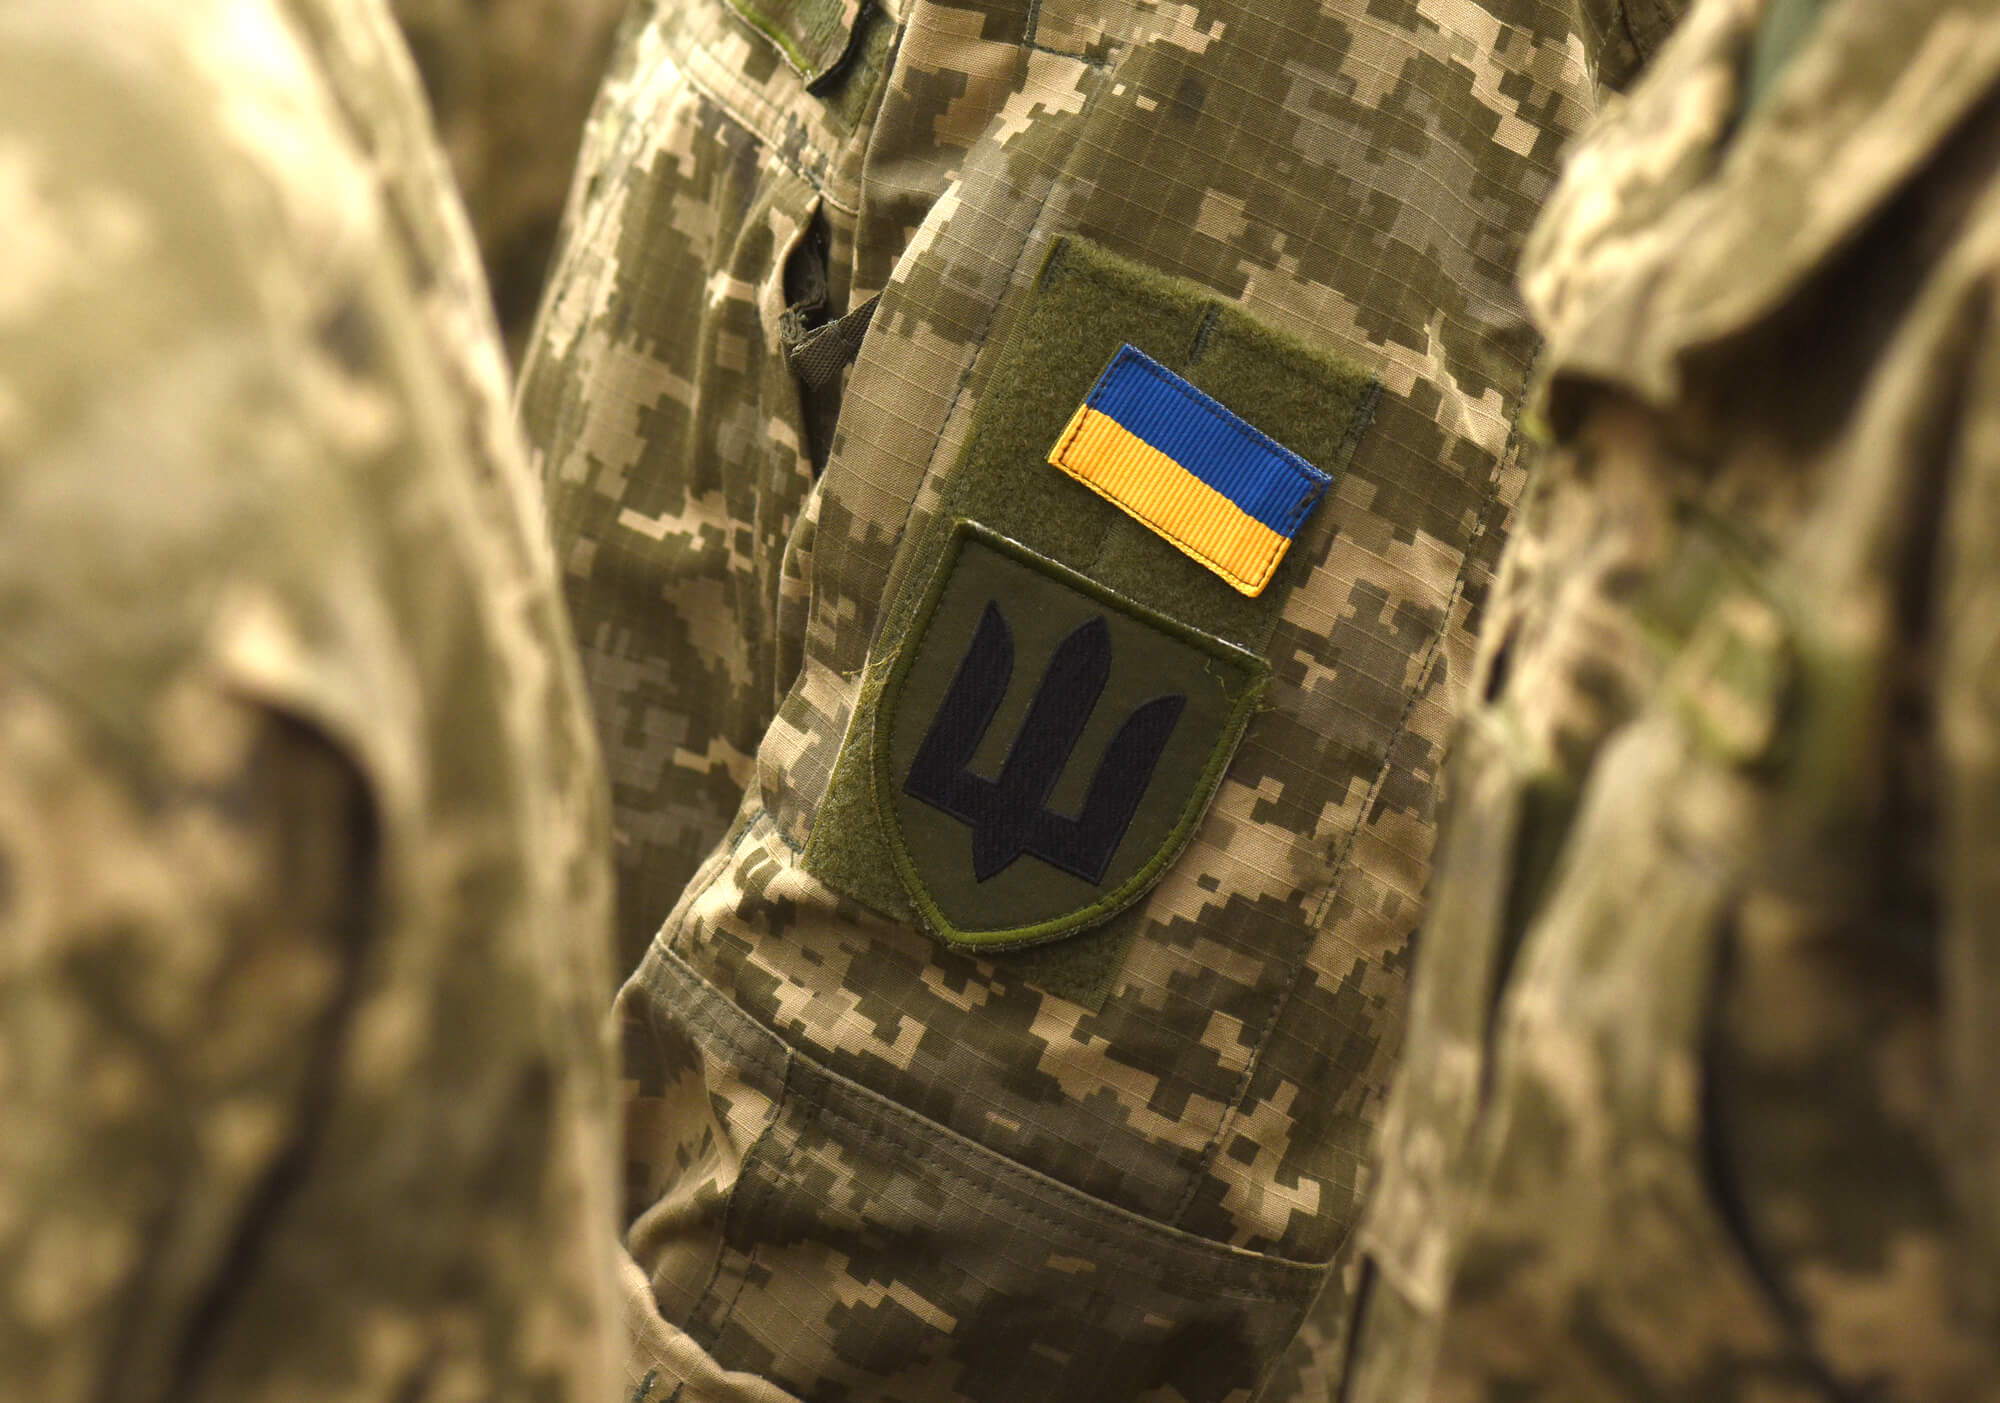 Pensions for Military Personnel  in Ukraine: Years of Service